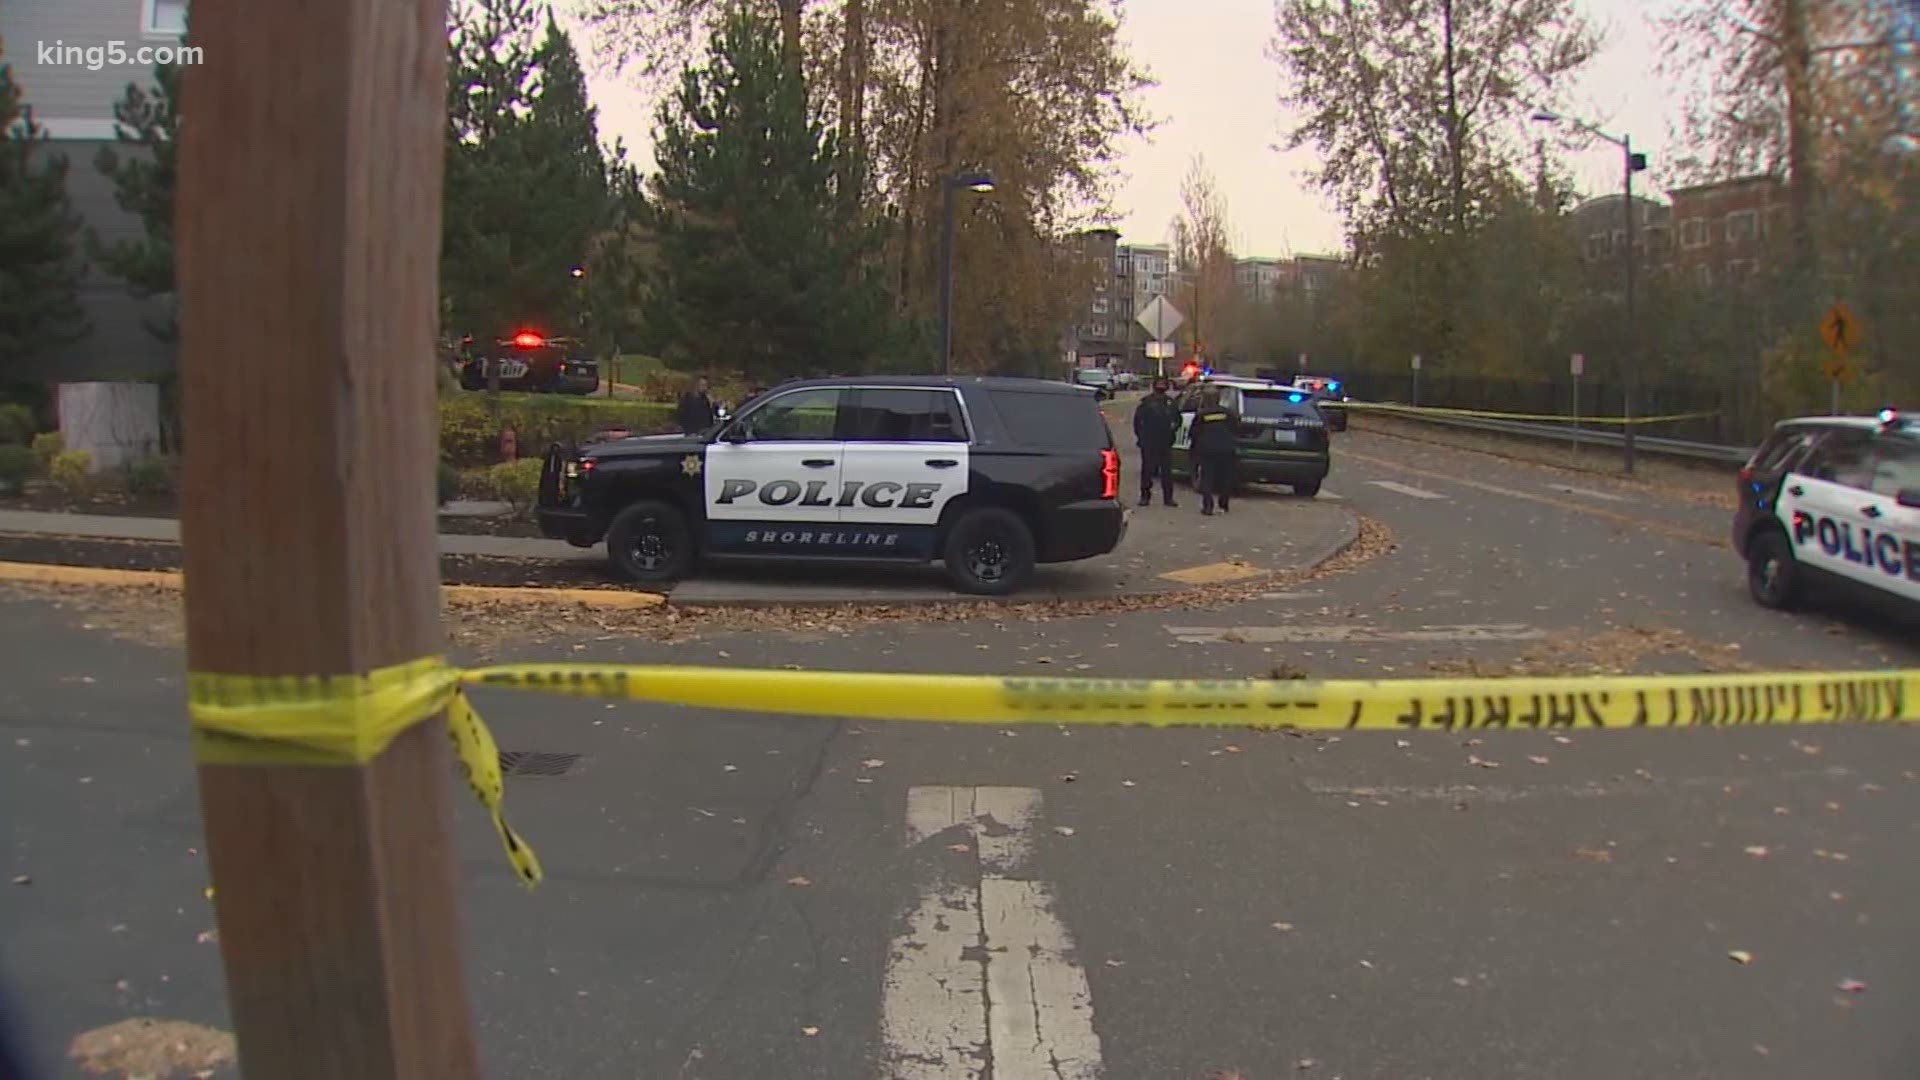 Two King County Sheriff's deputies were shot while responding to a car prowler complaint. The suspect involved was shot and killed.